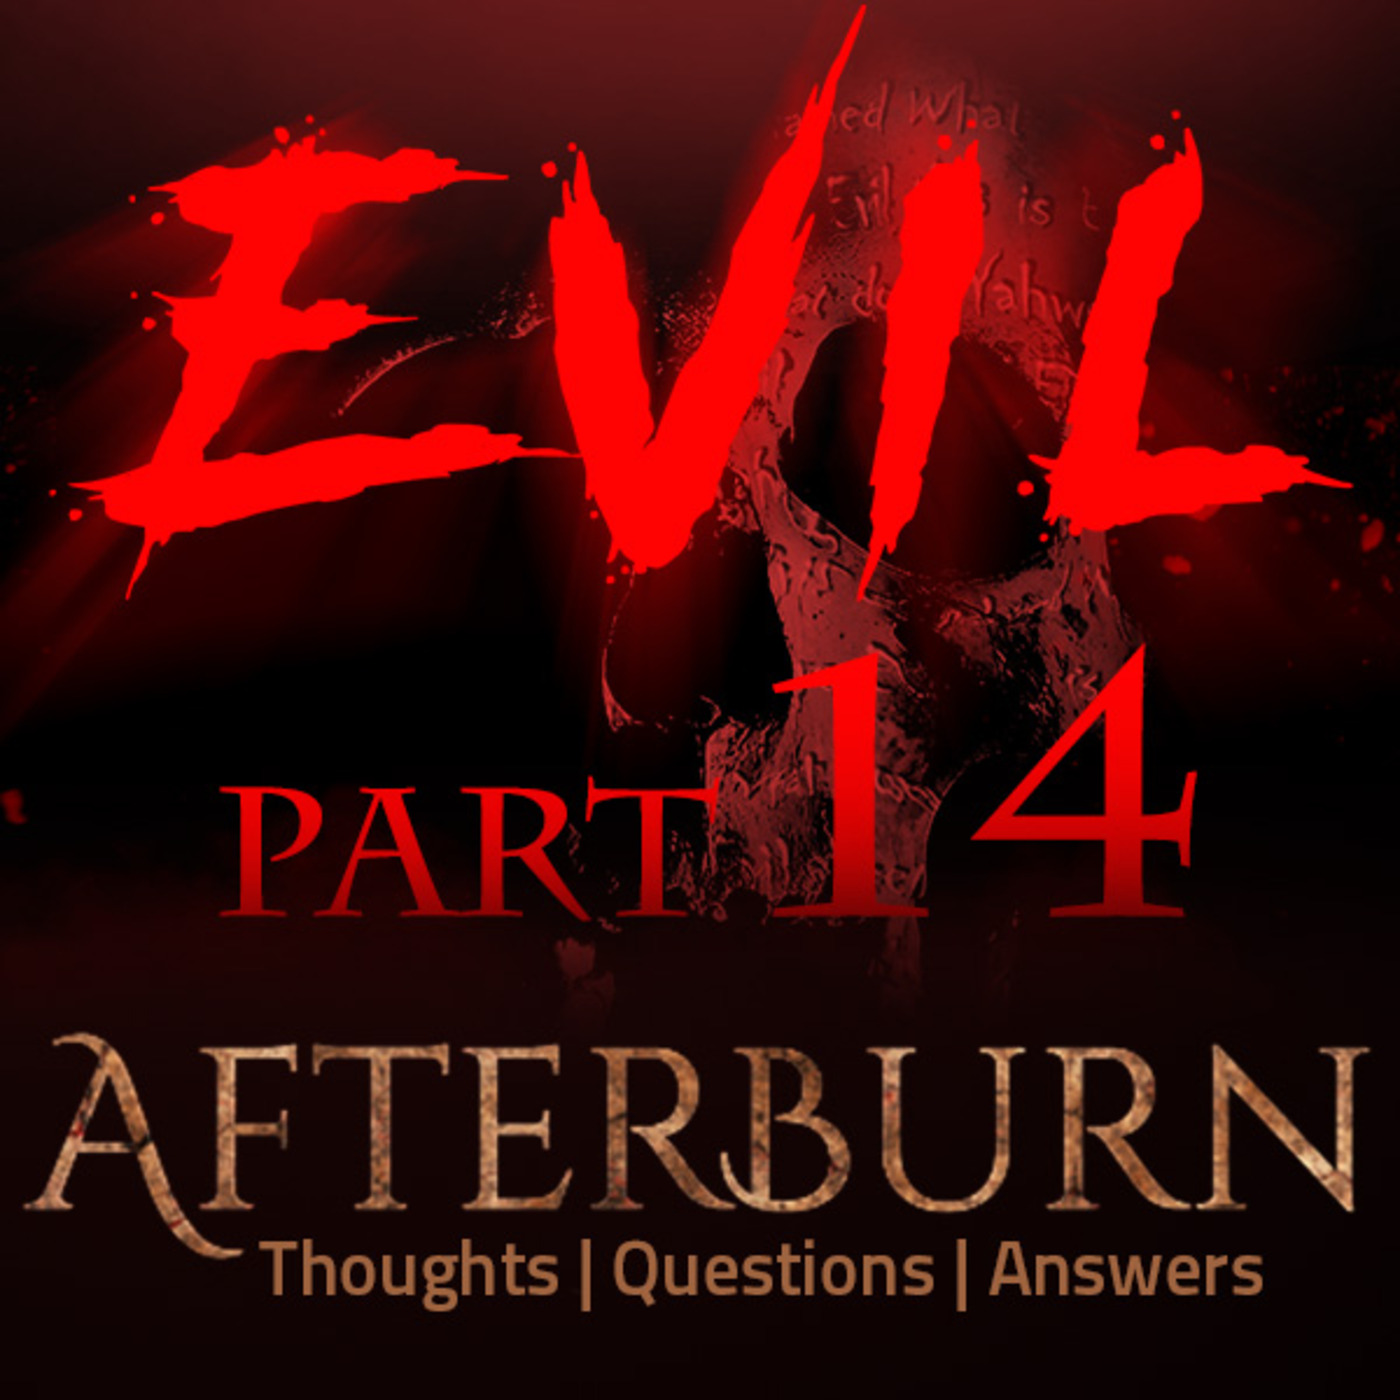 Episode 740: Afterburn | Thoughts, Q&A on Evil | Part 14